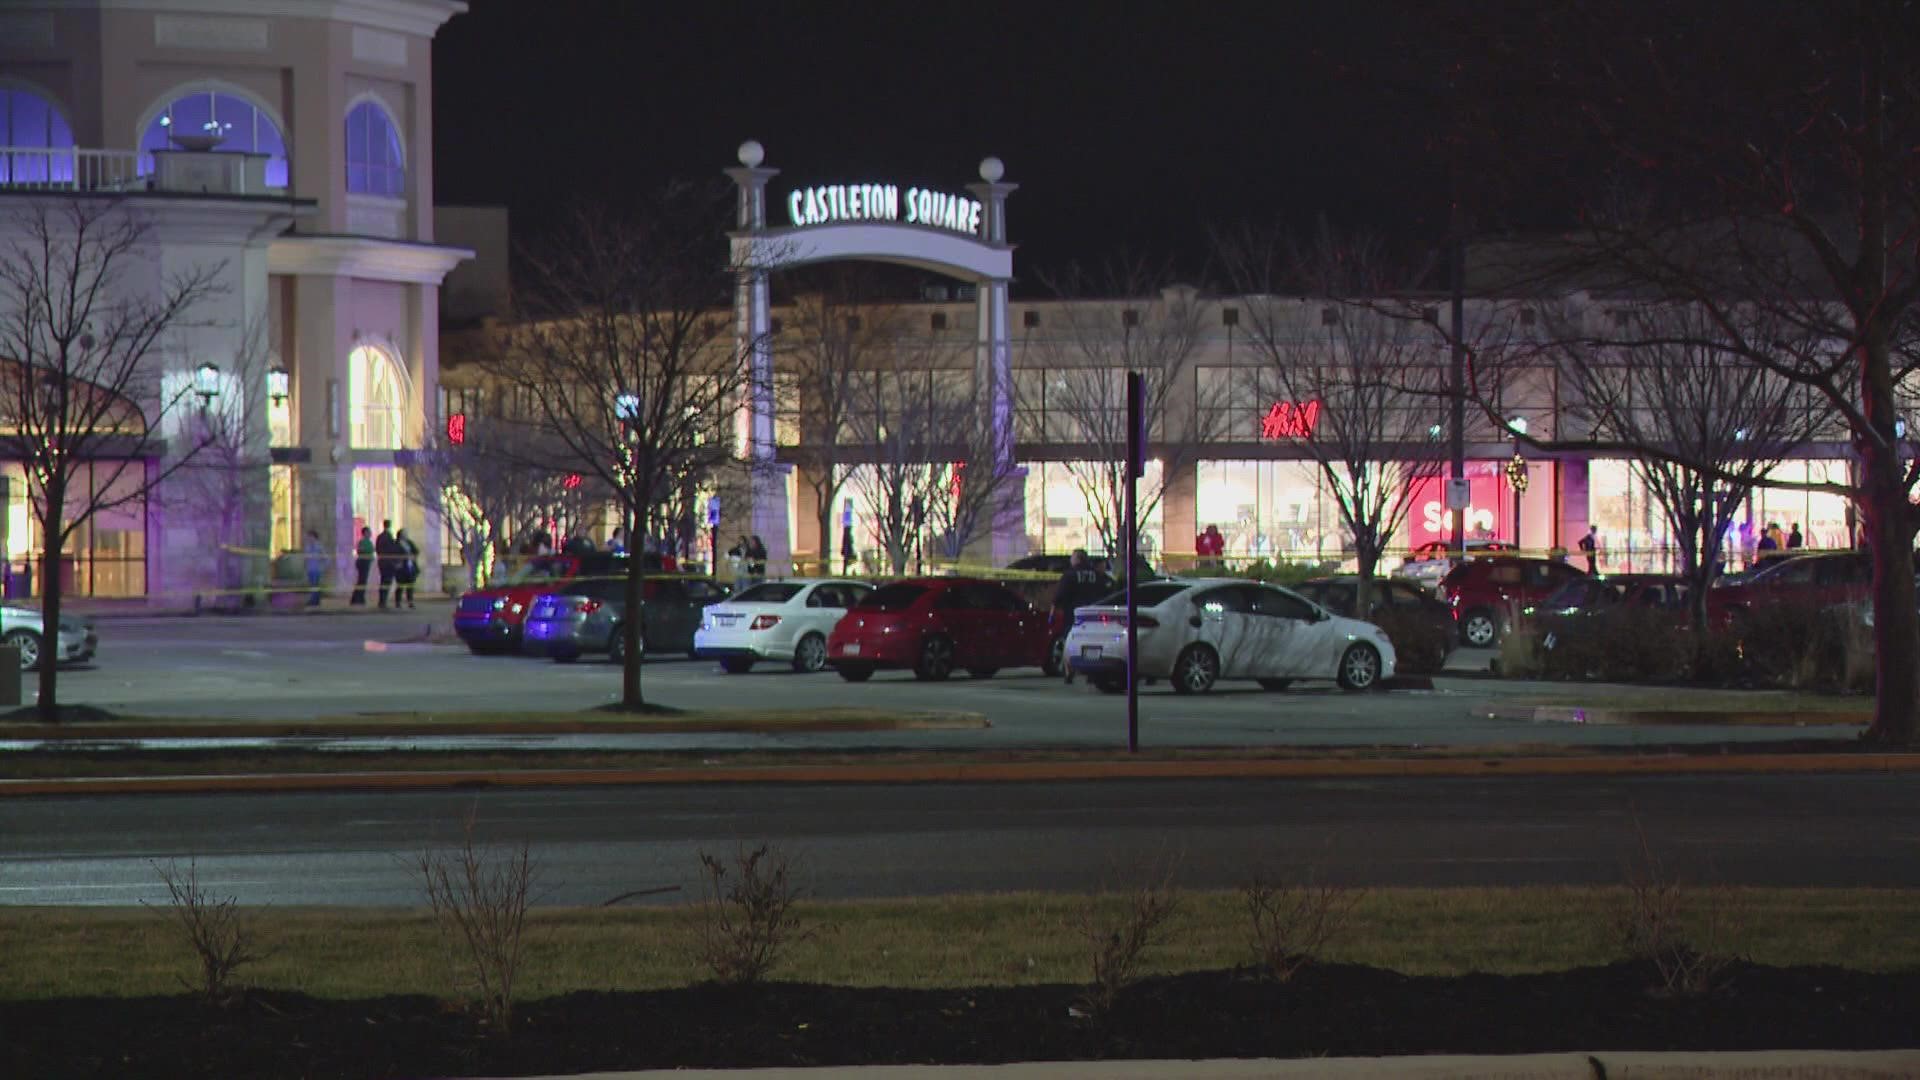 We've got new information about last month's shooting outside Castleton Square Mall that killed one person and wounded another.